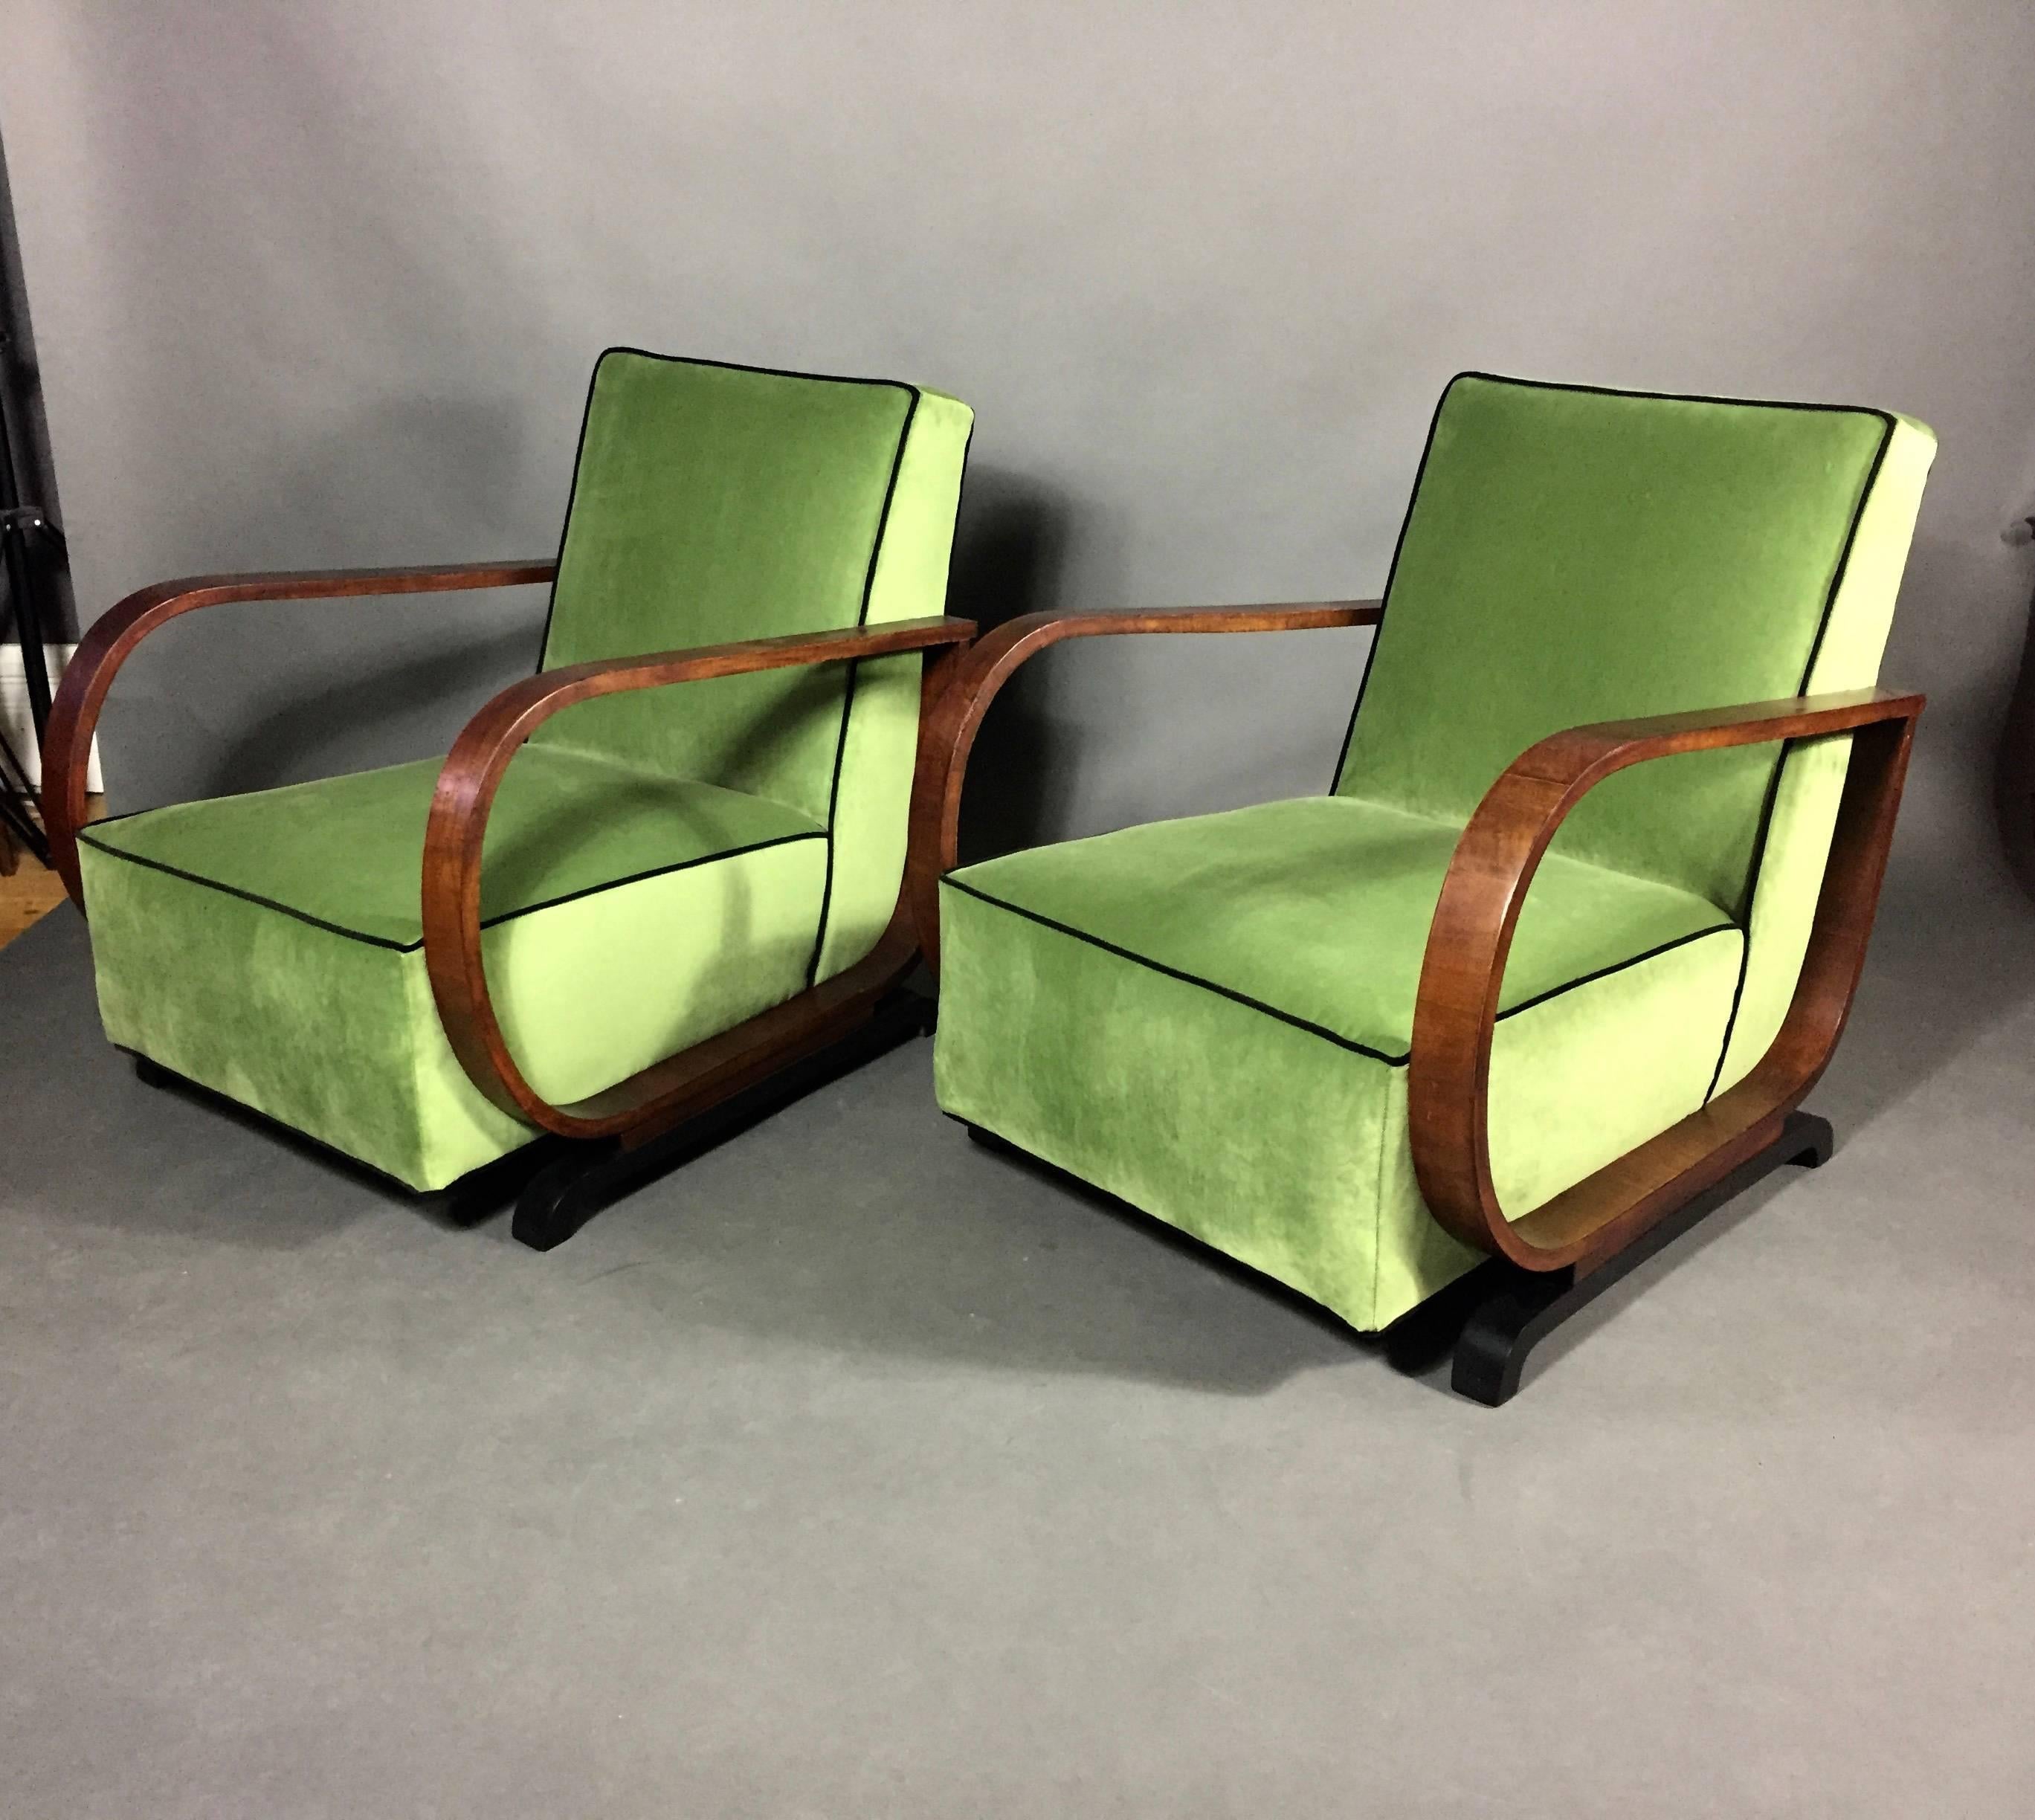 German Pair of Art Deco Lounge Chairs in Walnut and Velvet, Late 1930s